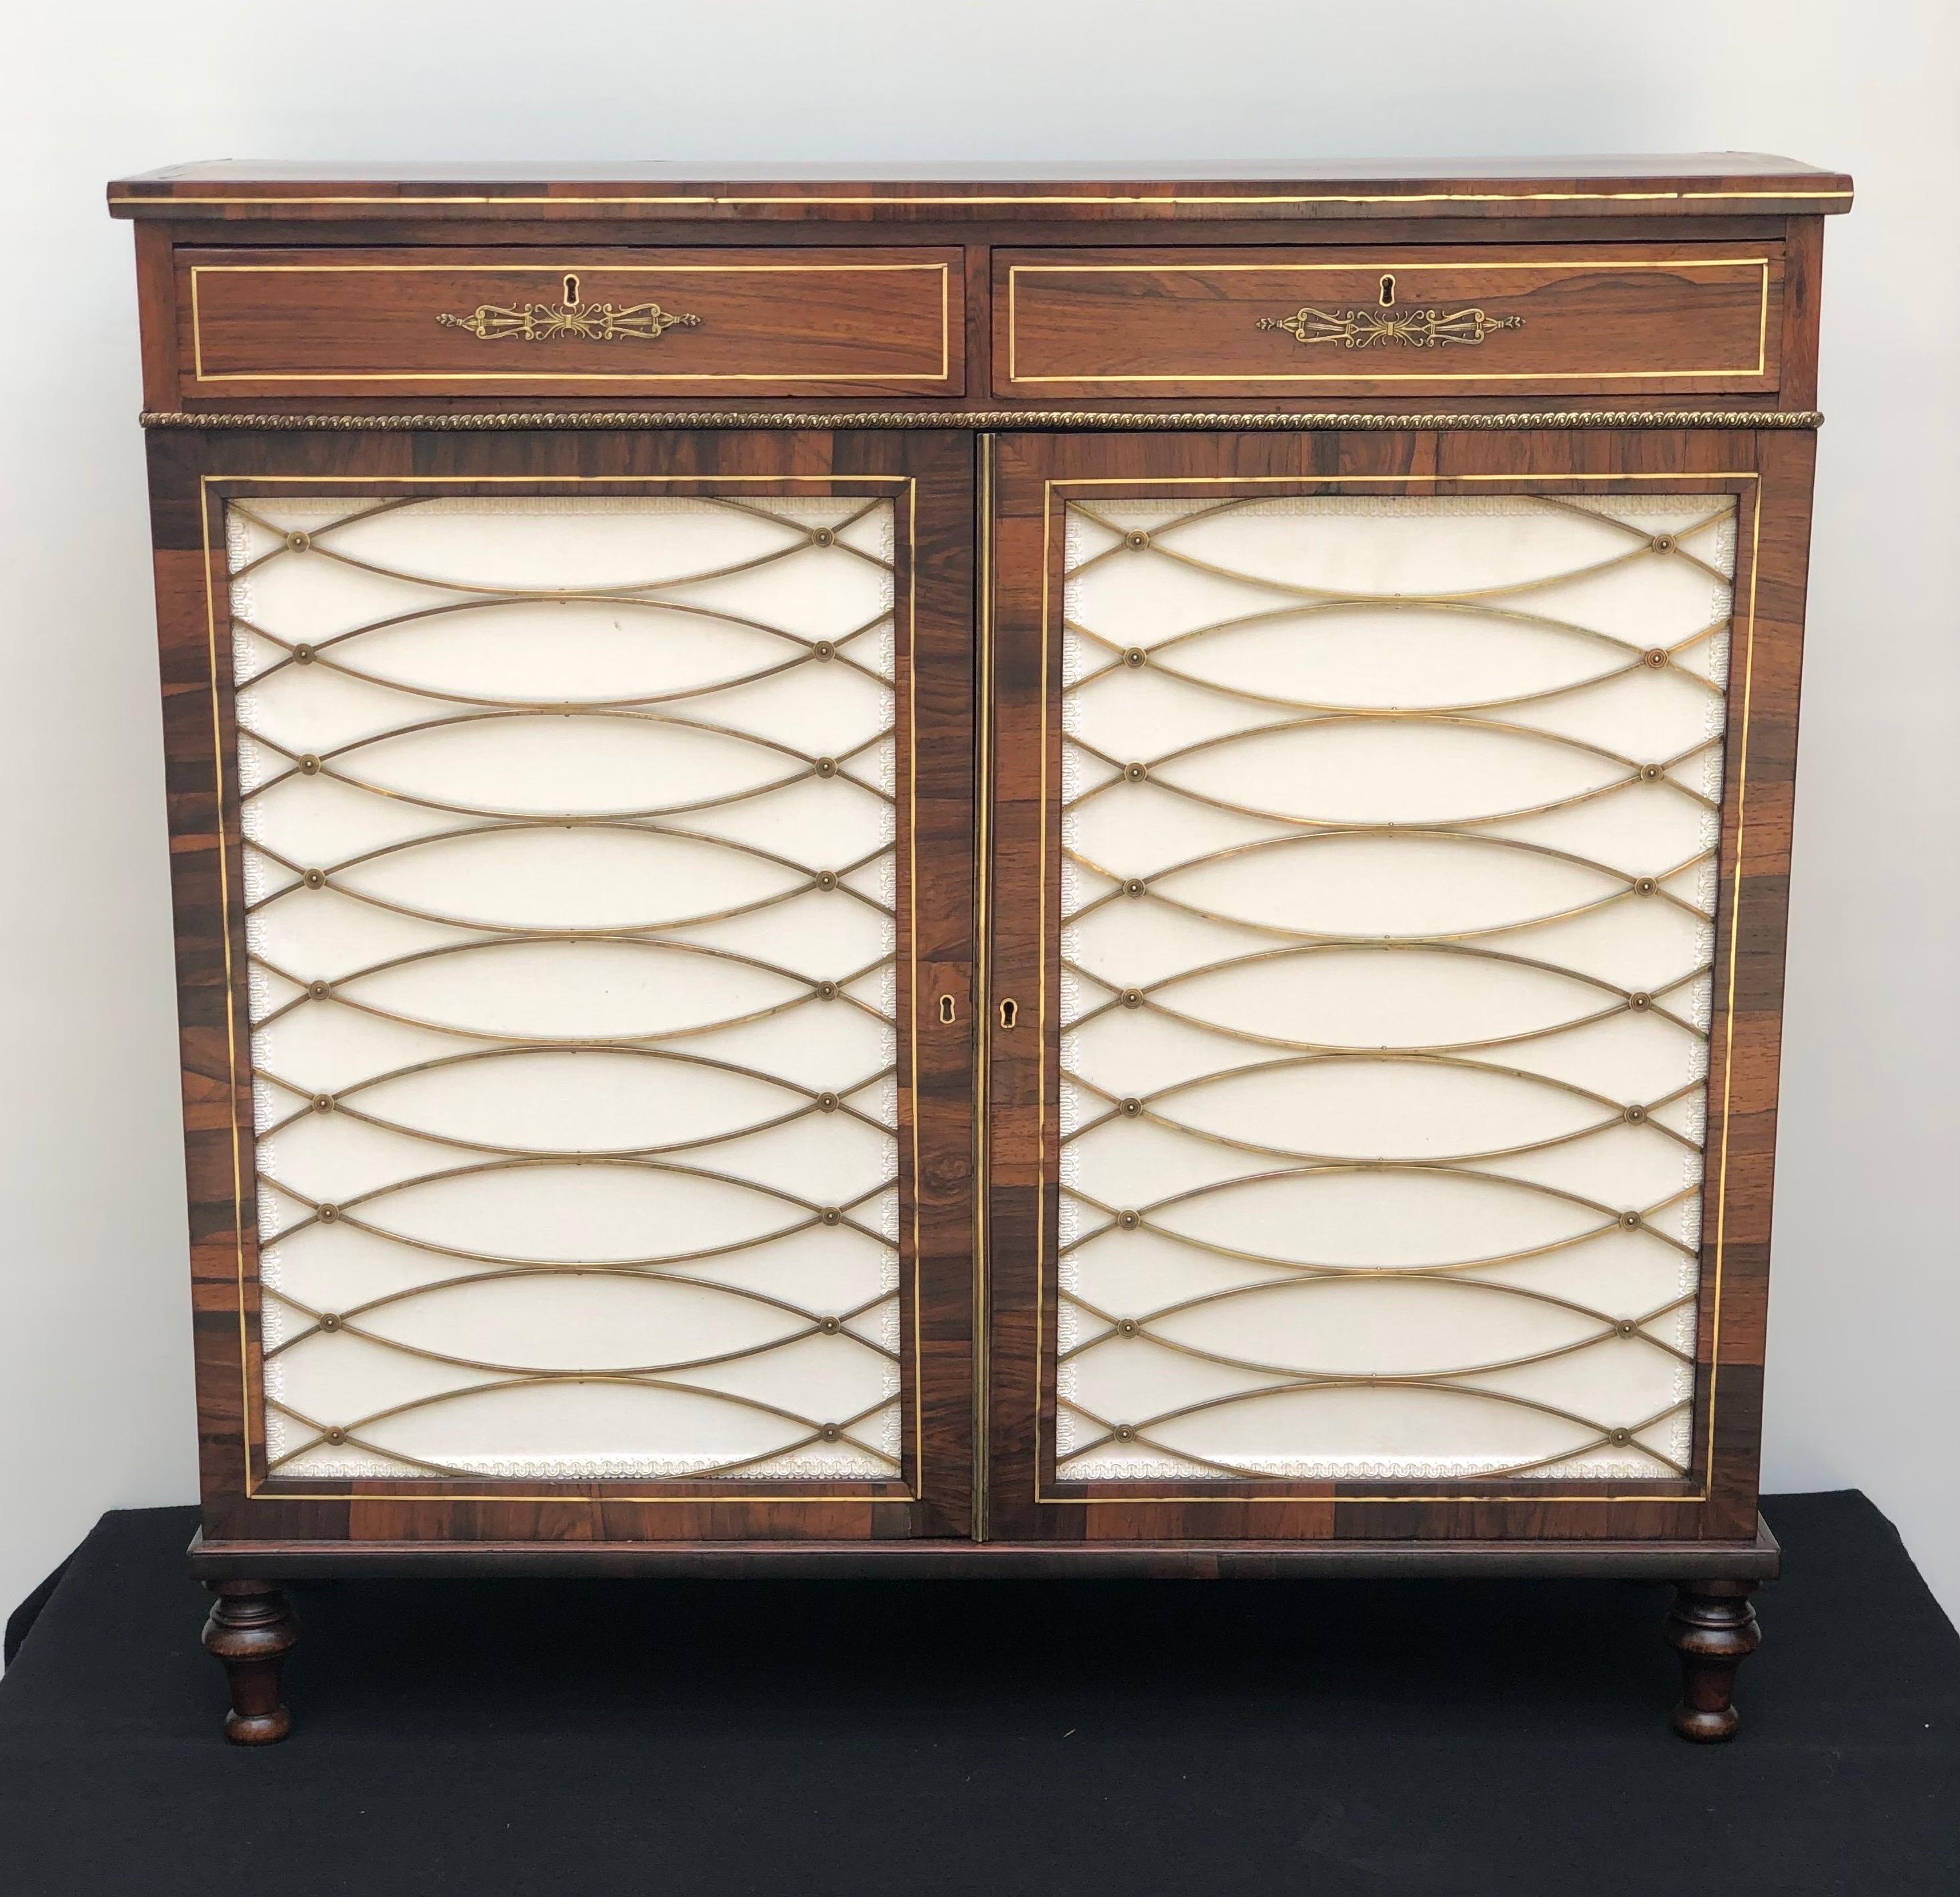 Elegant English Regency rosewood brass mounted, brass inlay credenza / side cabinet having two keyed drawers above two cabinet doors. The two cabinet doors are enhanced with fabric panels and original brass trellis-and-rosette grills. The cupboard